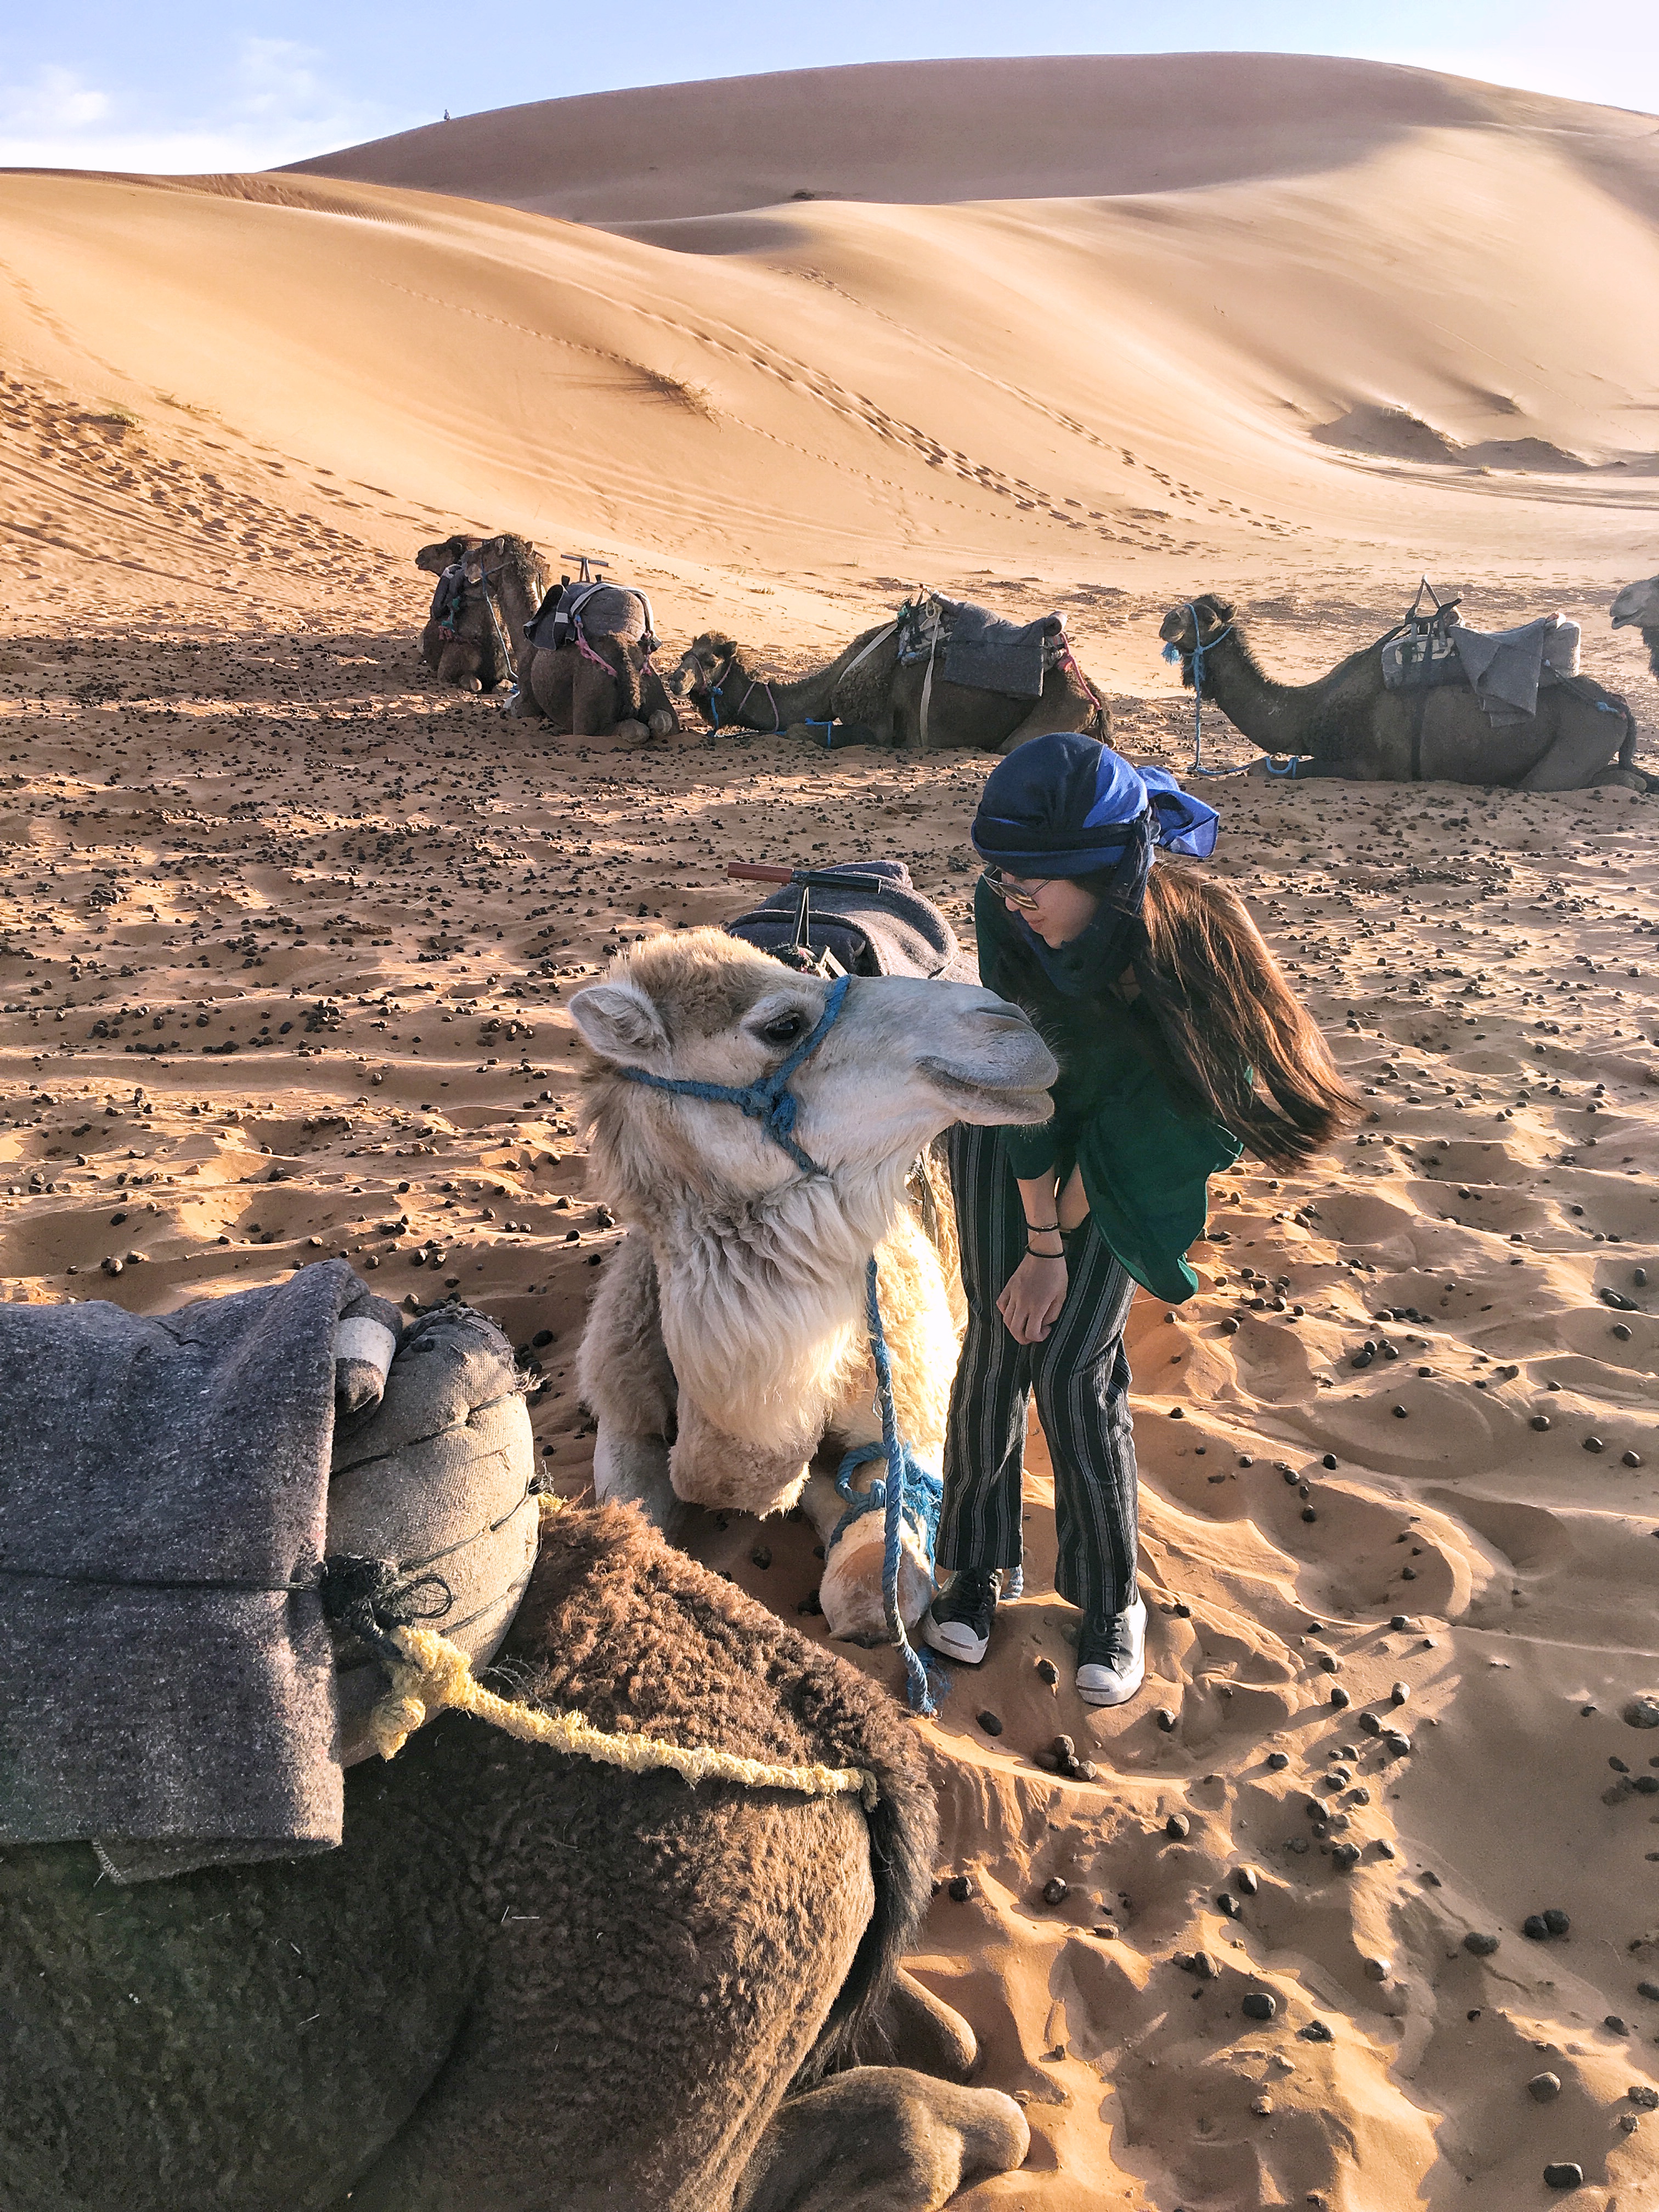 Making friends with camels in Sahara